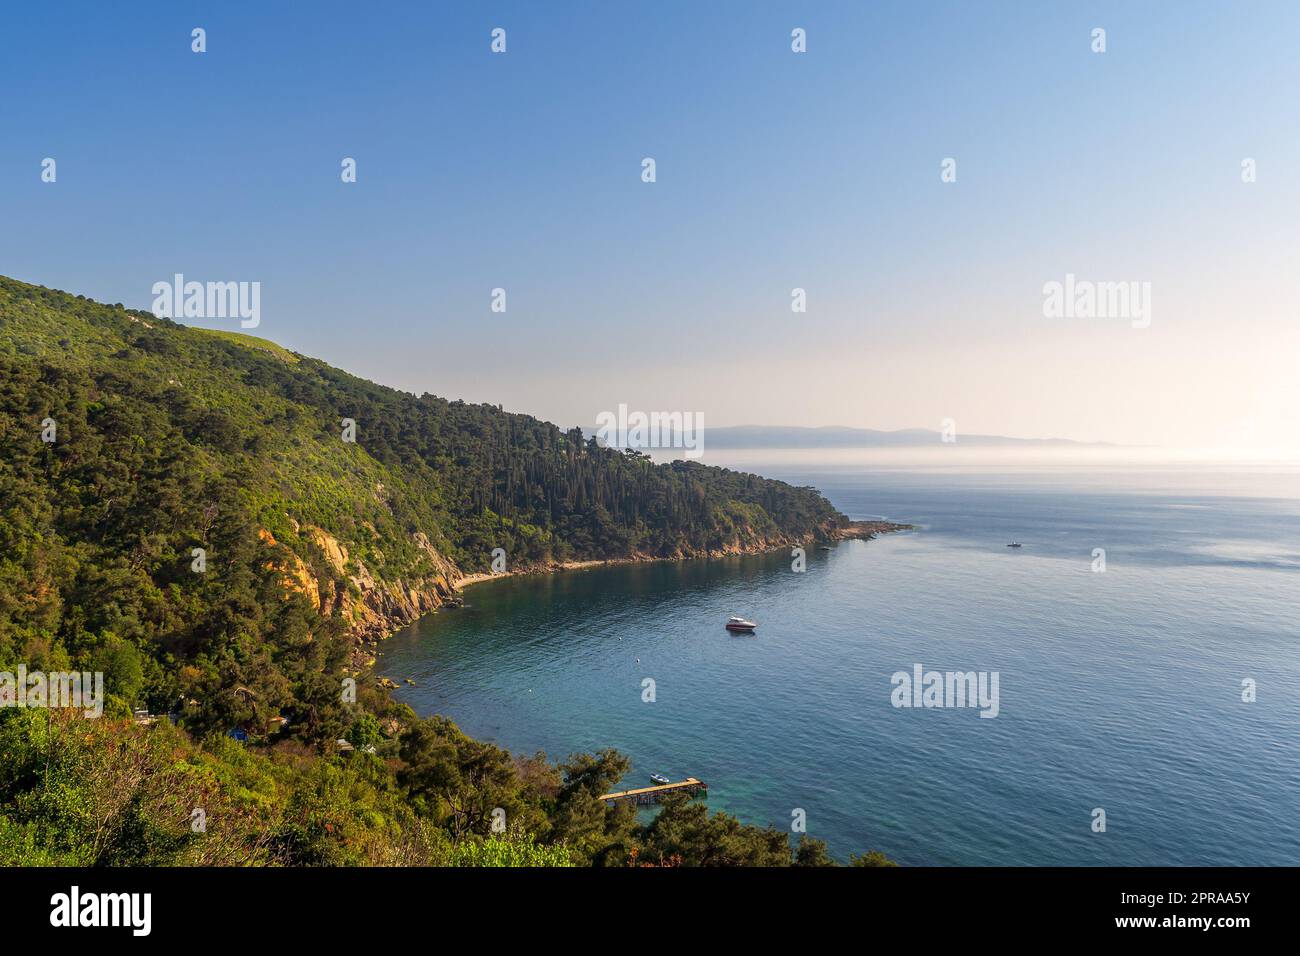 View from the top of mountains of Buyukada island, Marmara Sea, Istanbul, Turkey, with green woods Stock Photo